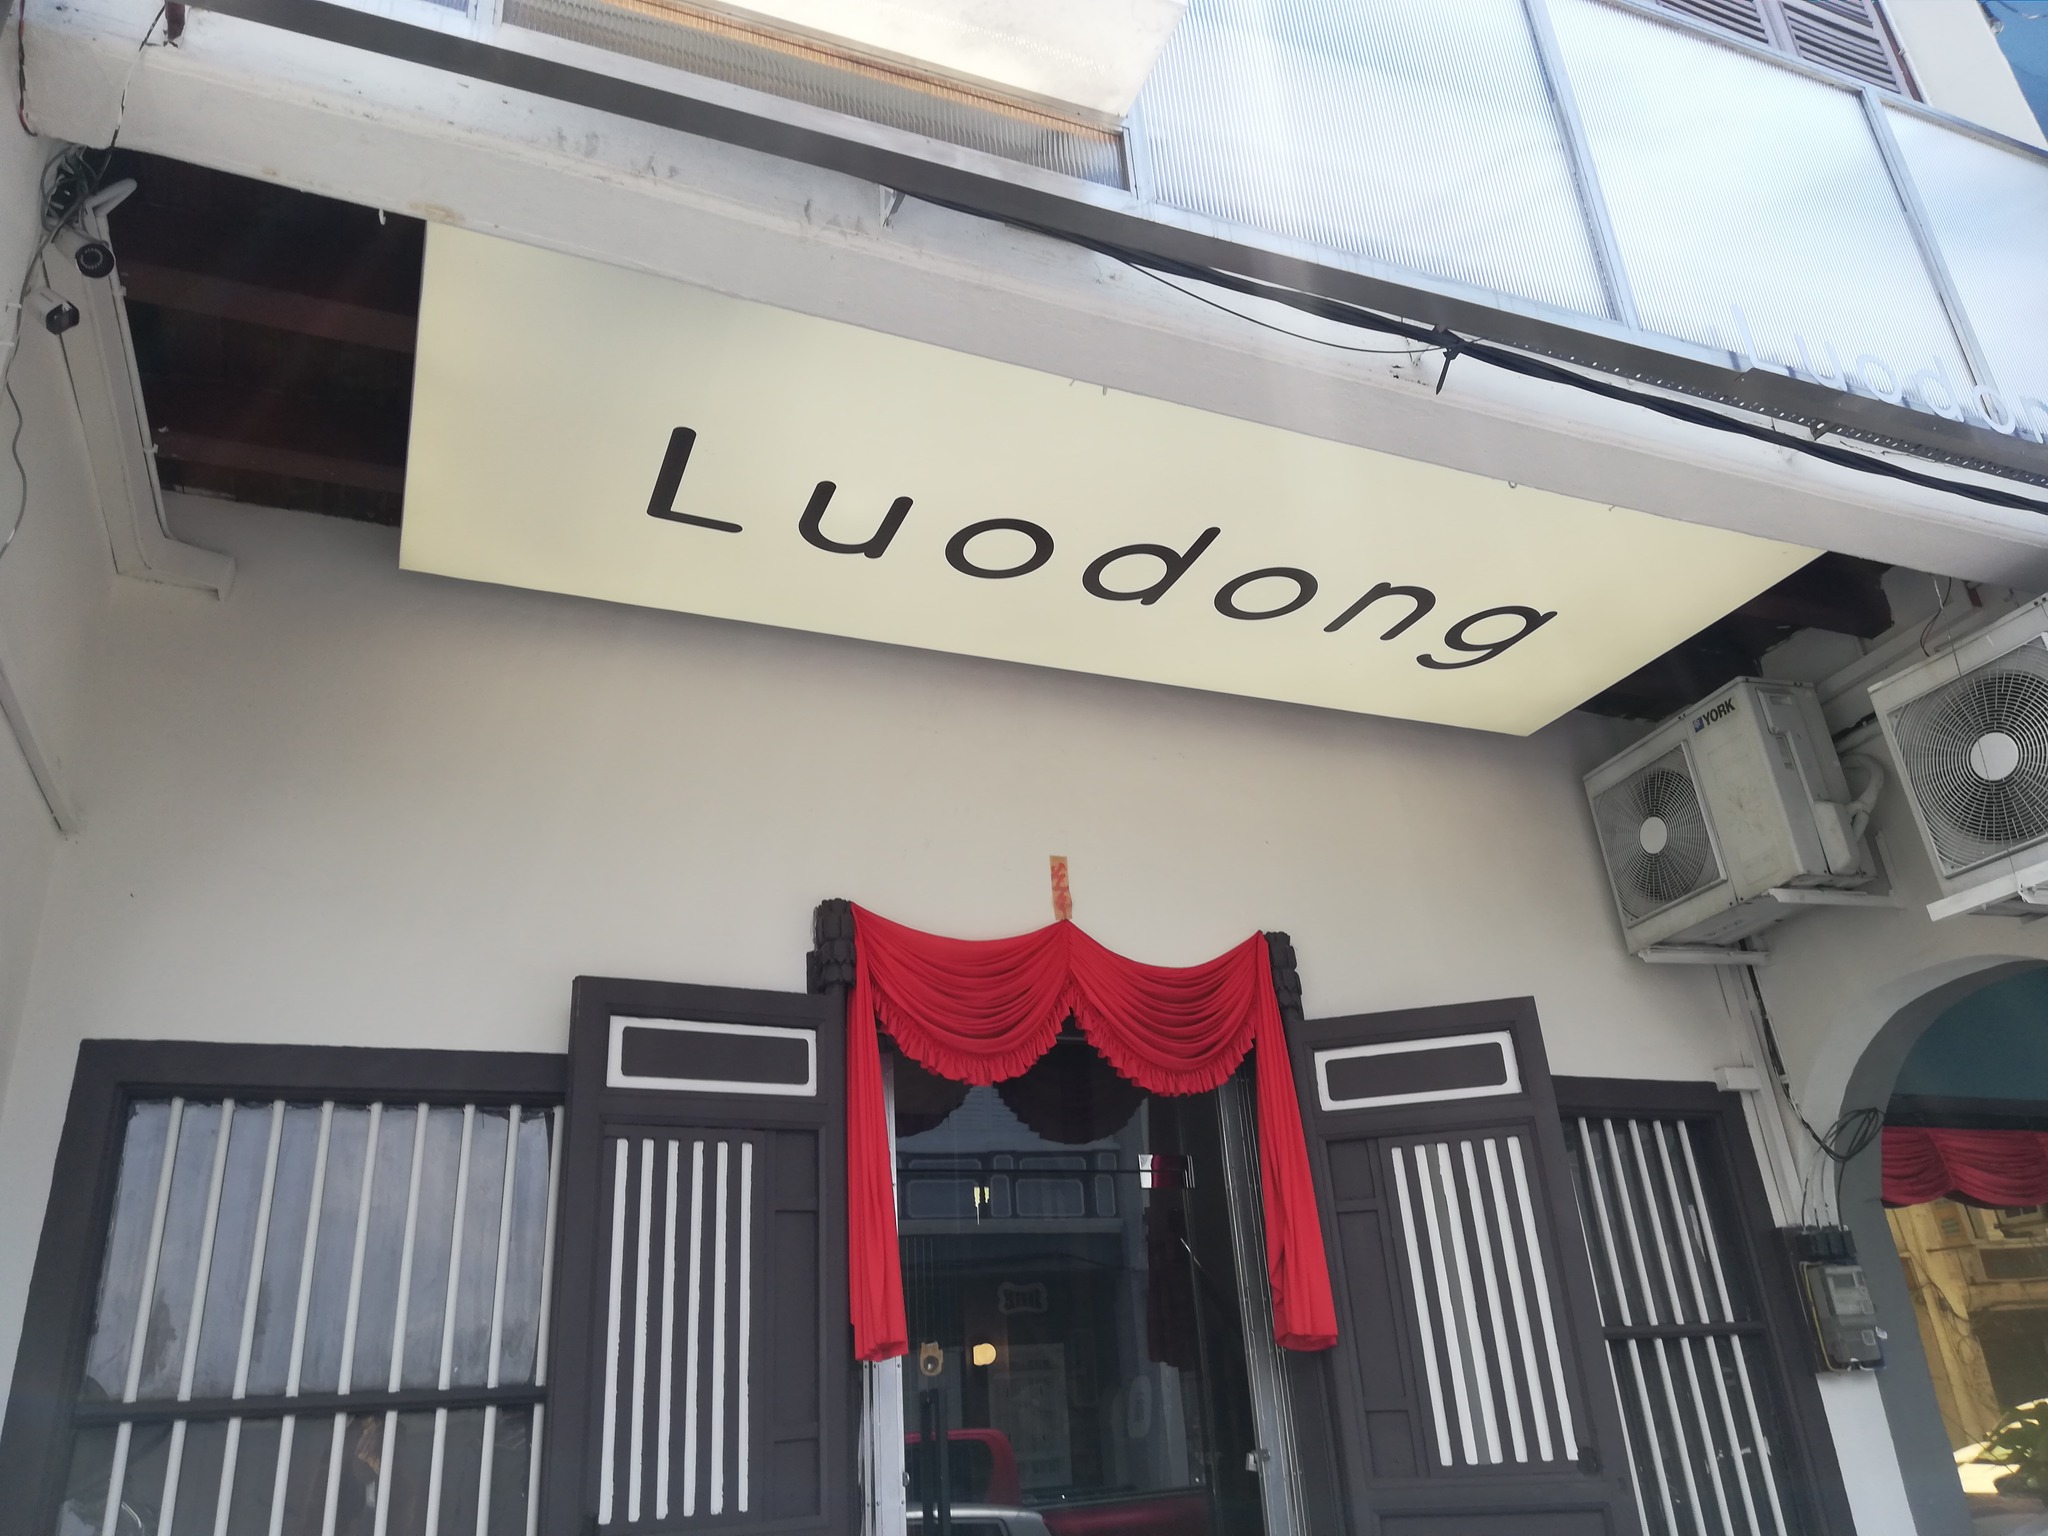 Luodong Cafe